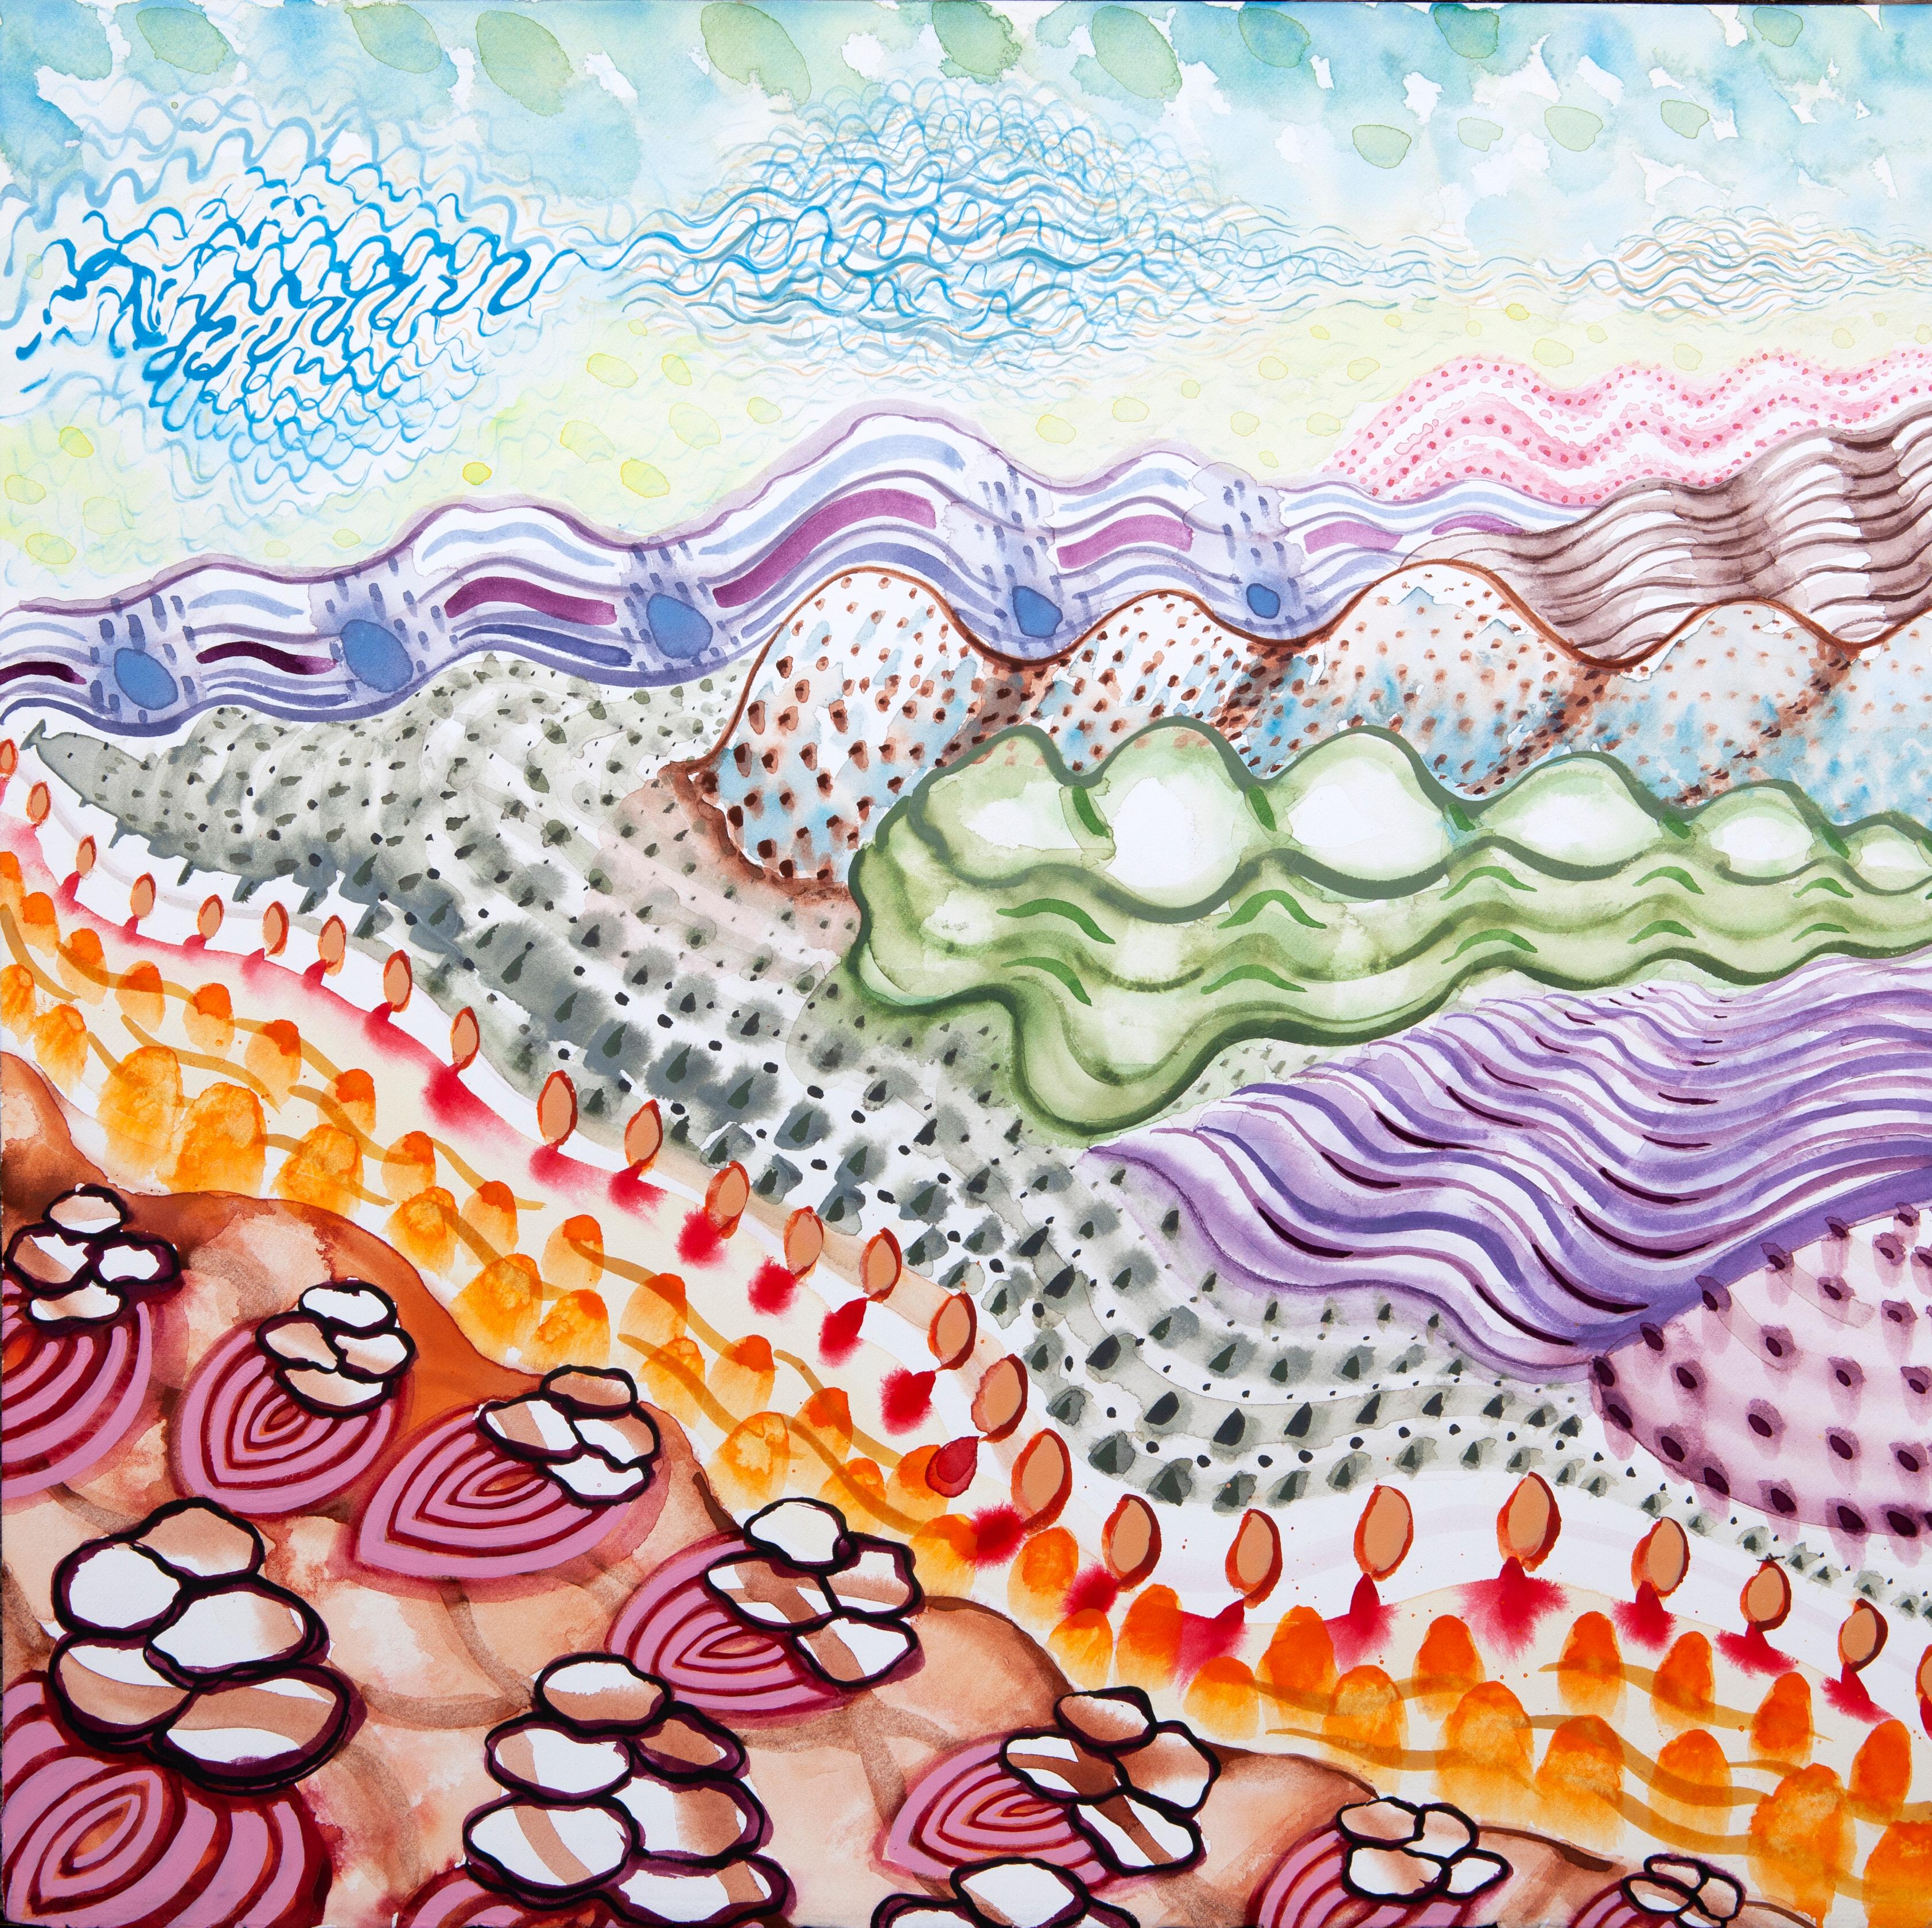 American Beauty, 26, surreal landscape painting on paper, bright patterns